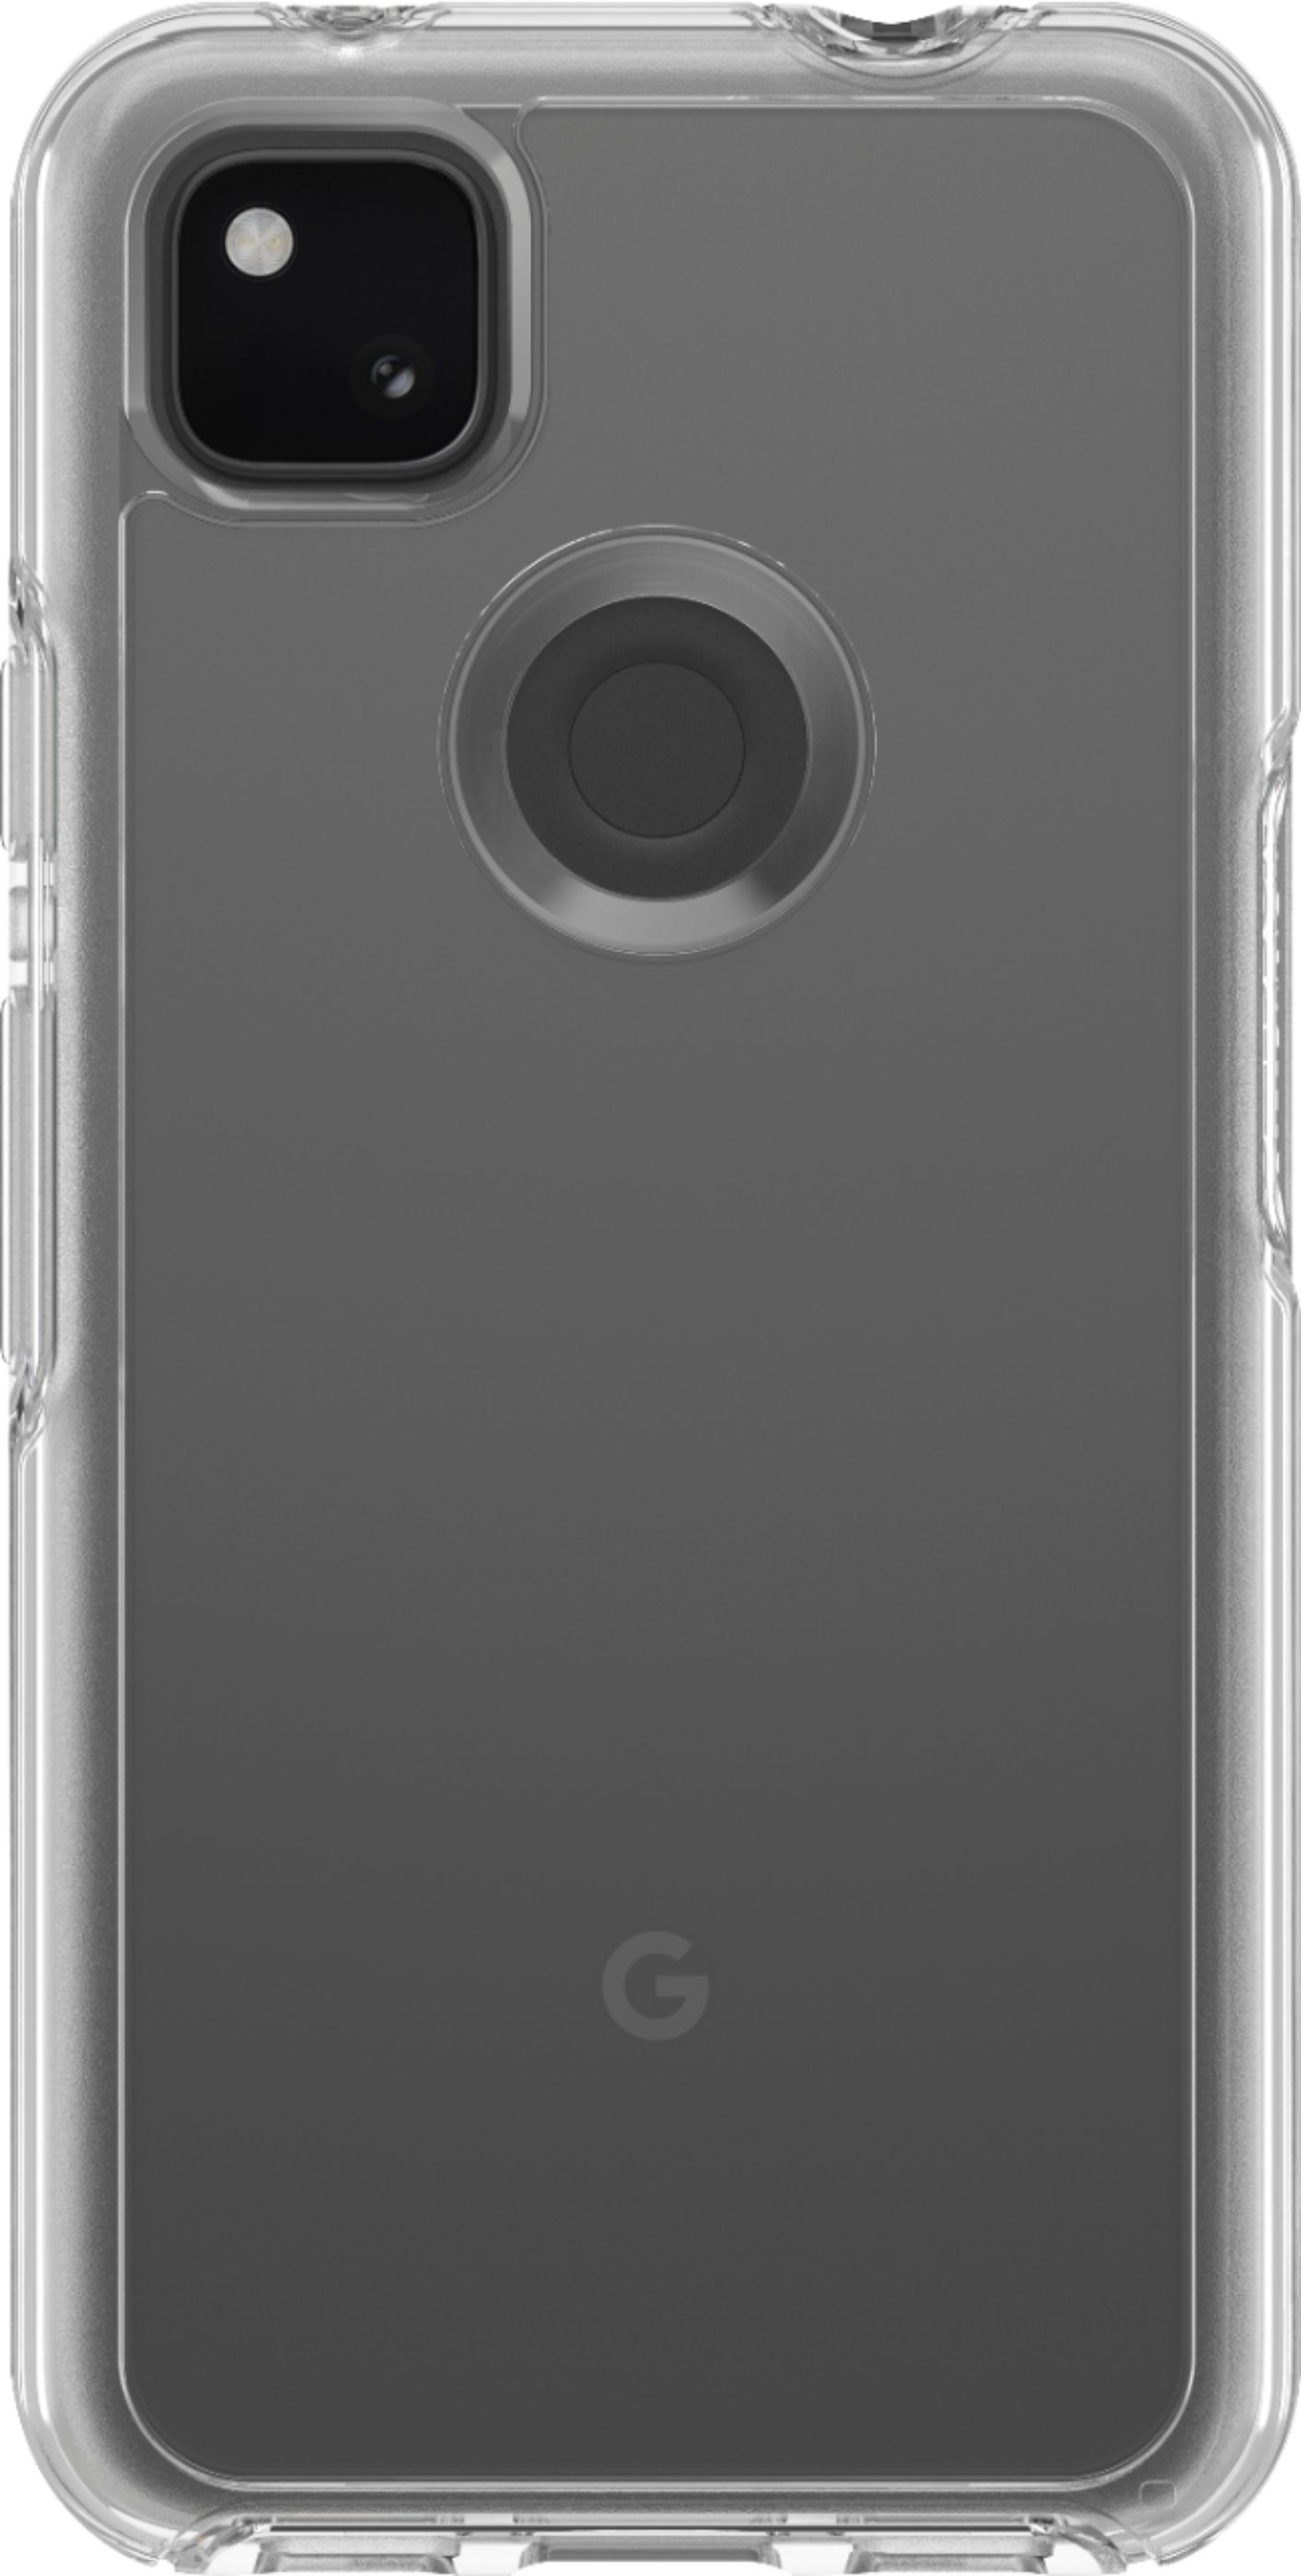 OtterBox Symmetry Series Case for Google Pixel 4 Smartphone Clear 